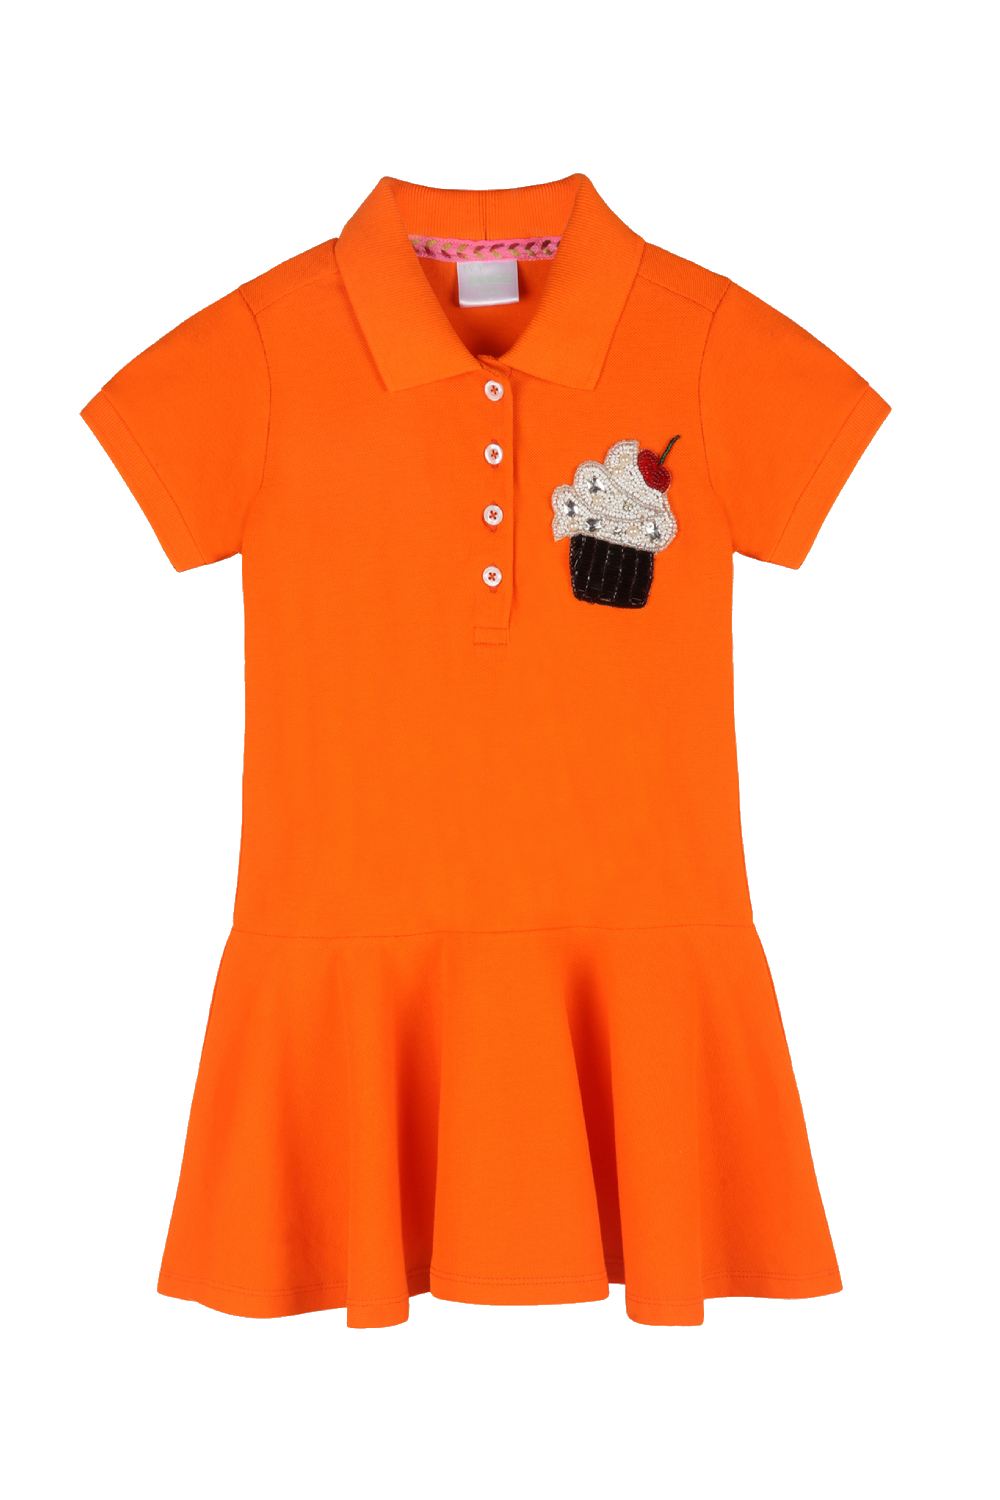 Girls Polo Dress In Drop Waist Silhouette And Muffin With Cherry Motif